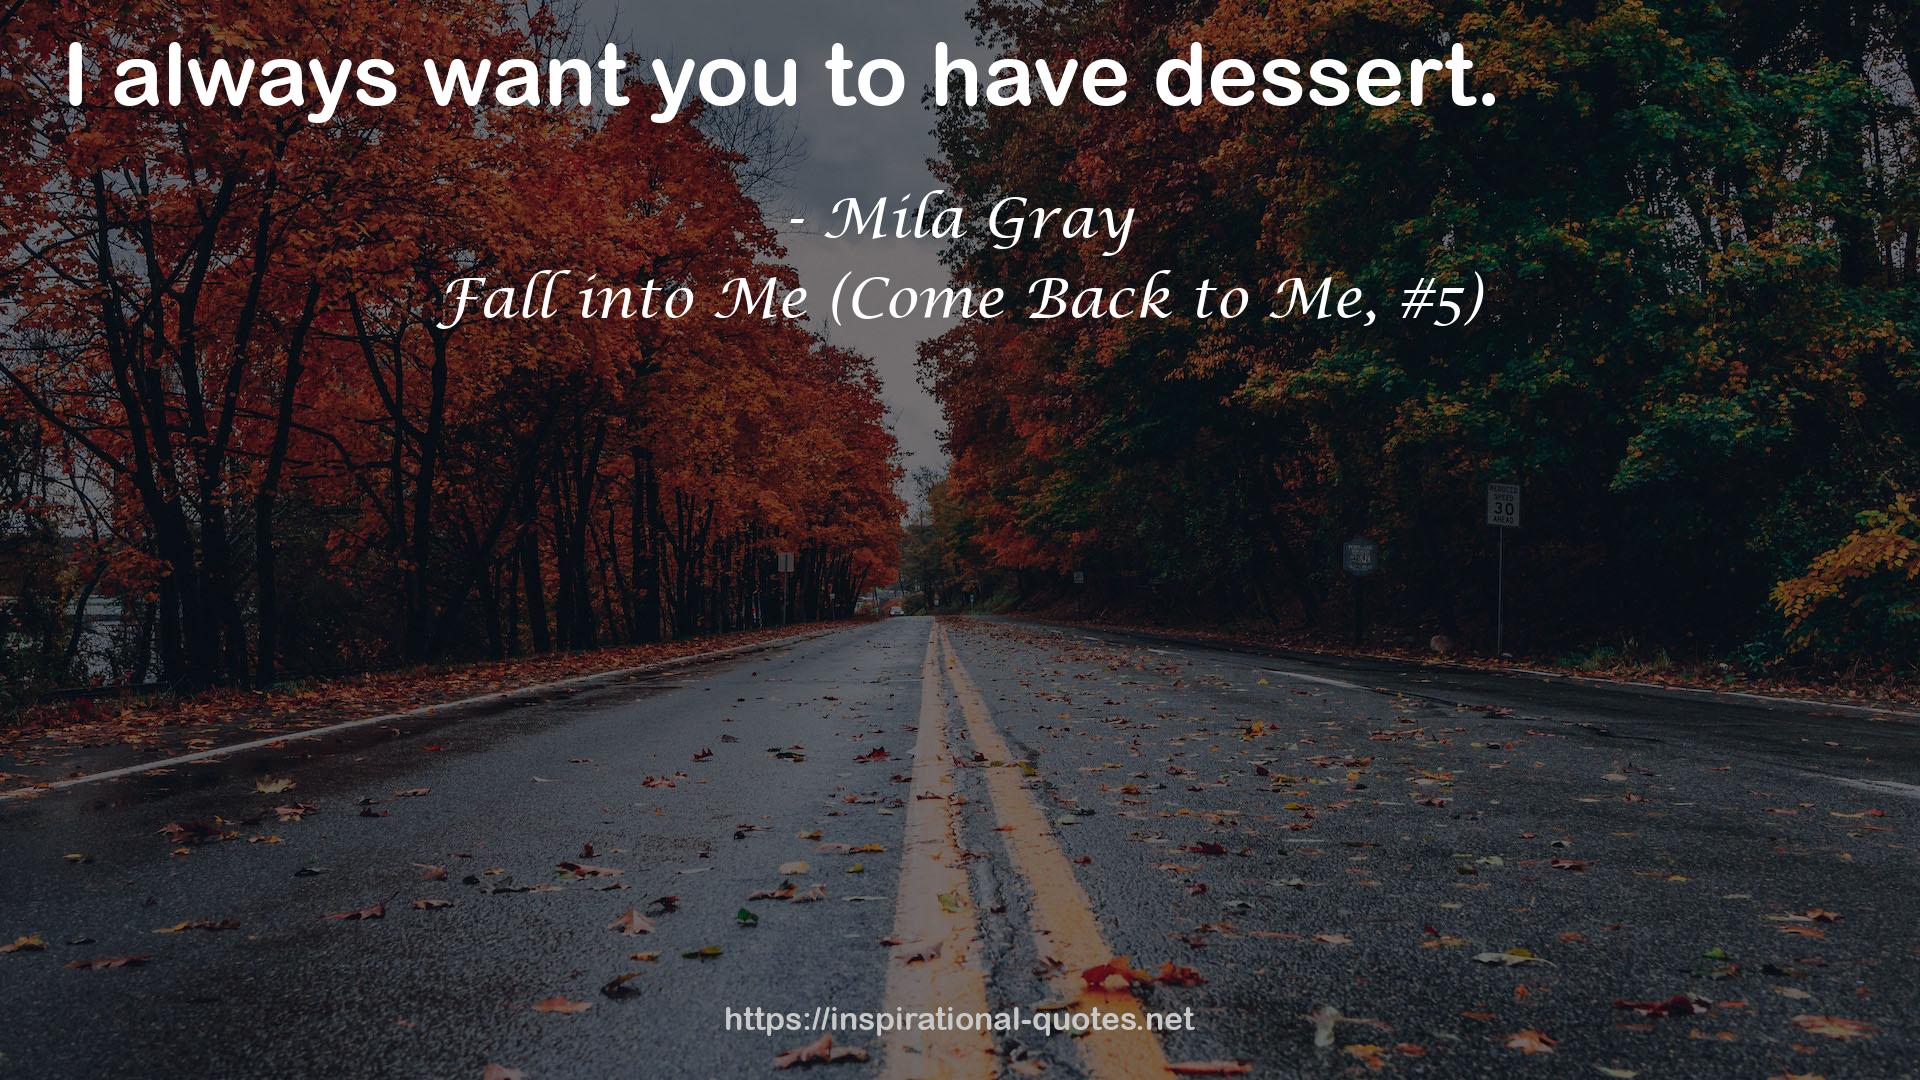 Fall into Me (Come Back to Me, #5) QUOTES